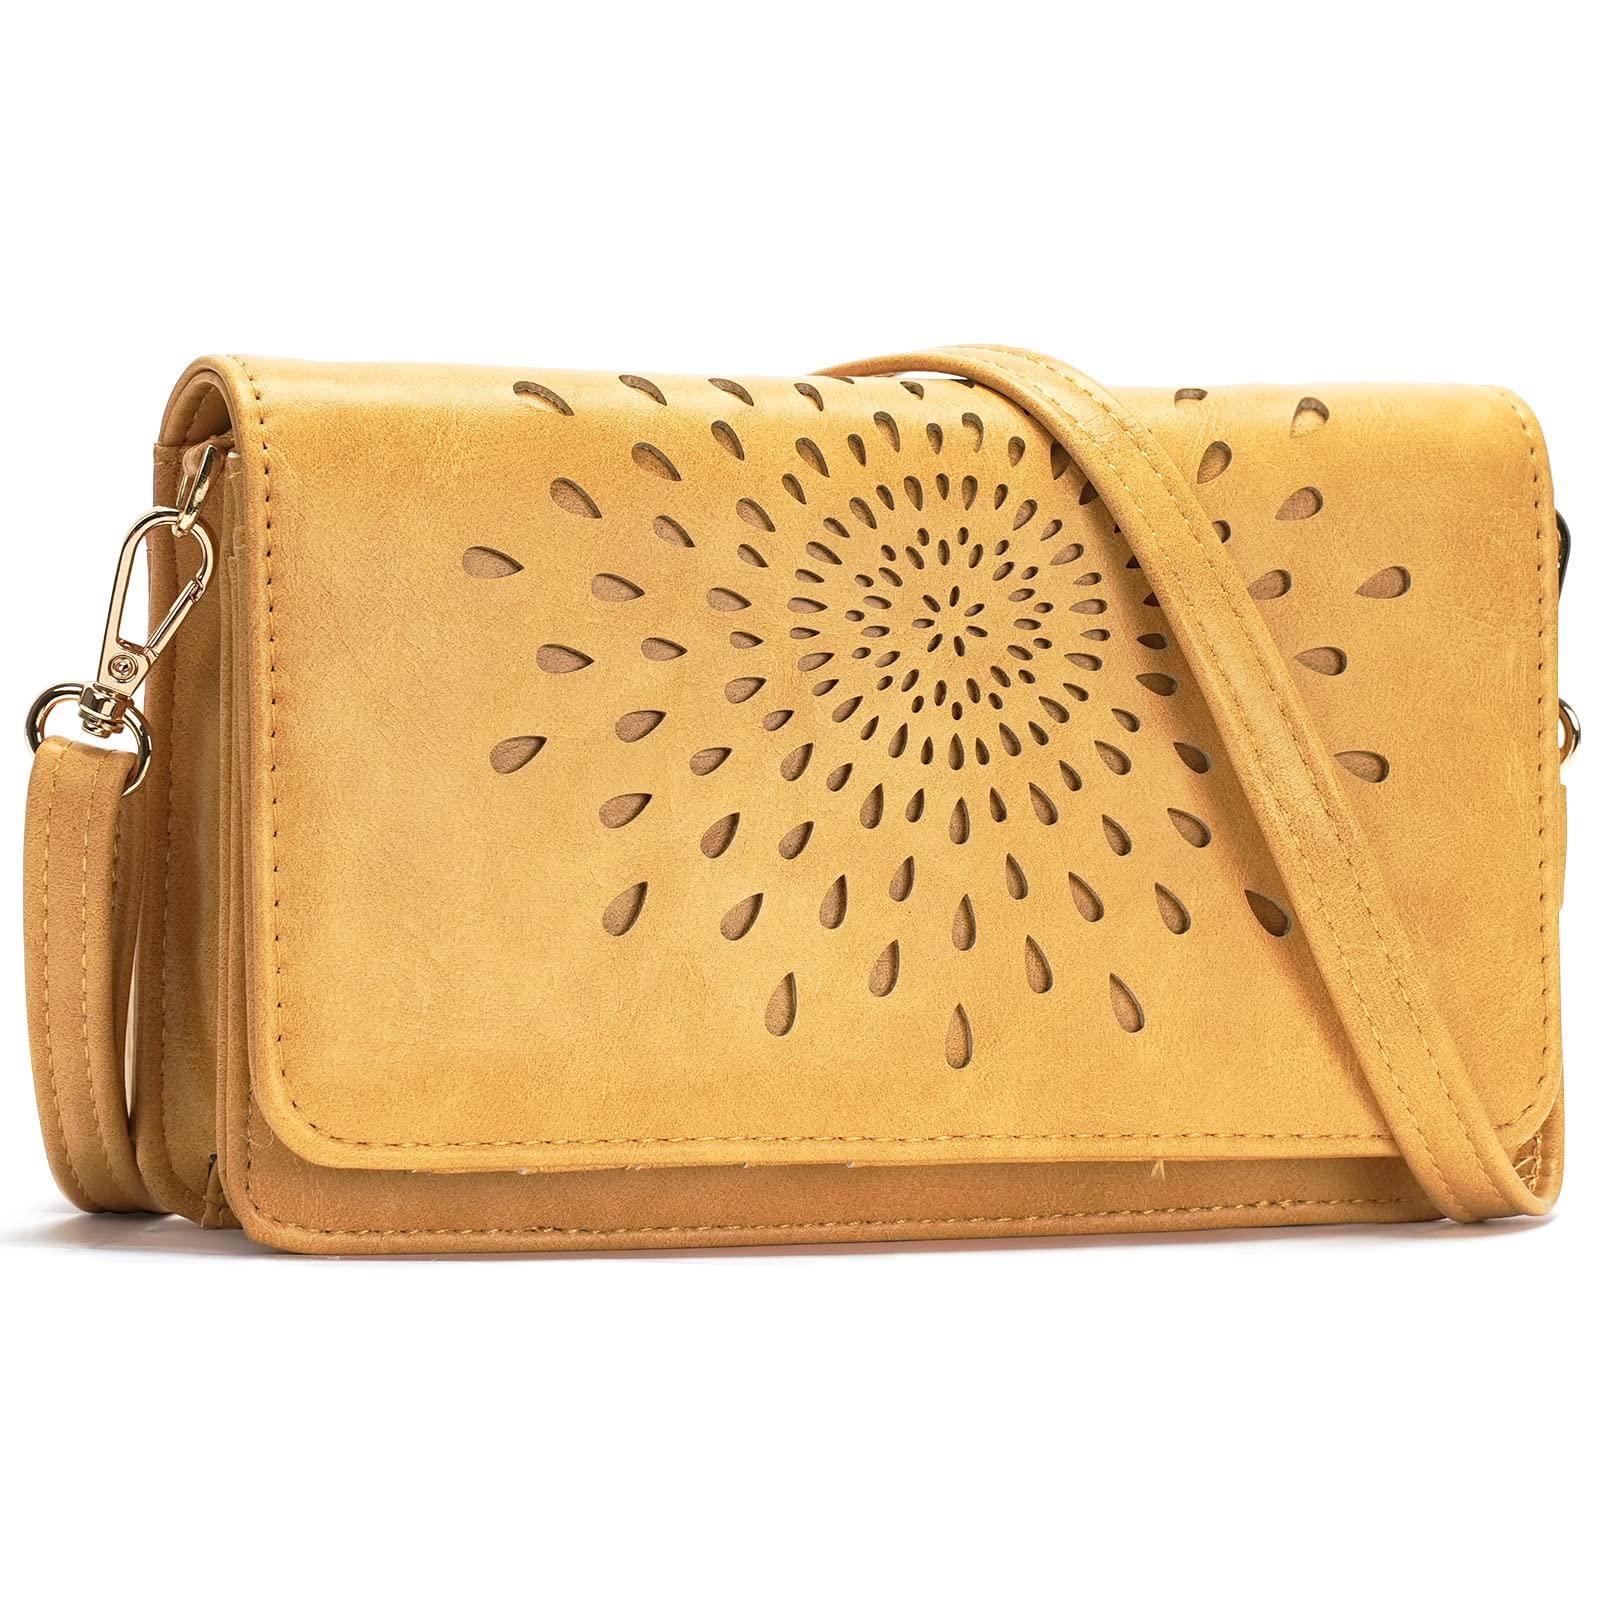 Top Brands For Functional Festive Clutches l LBB